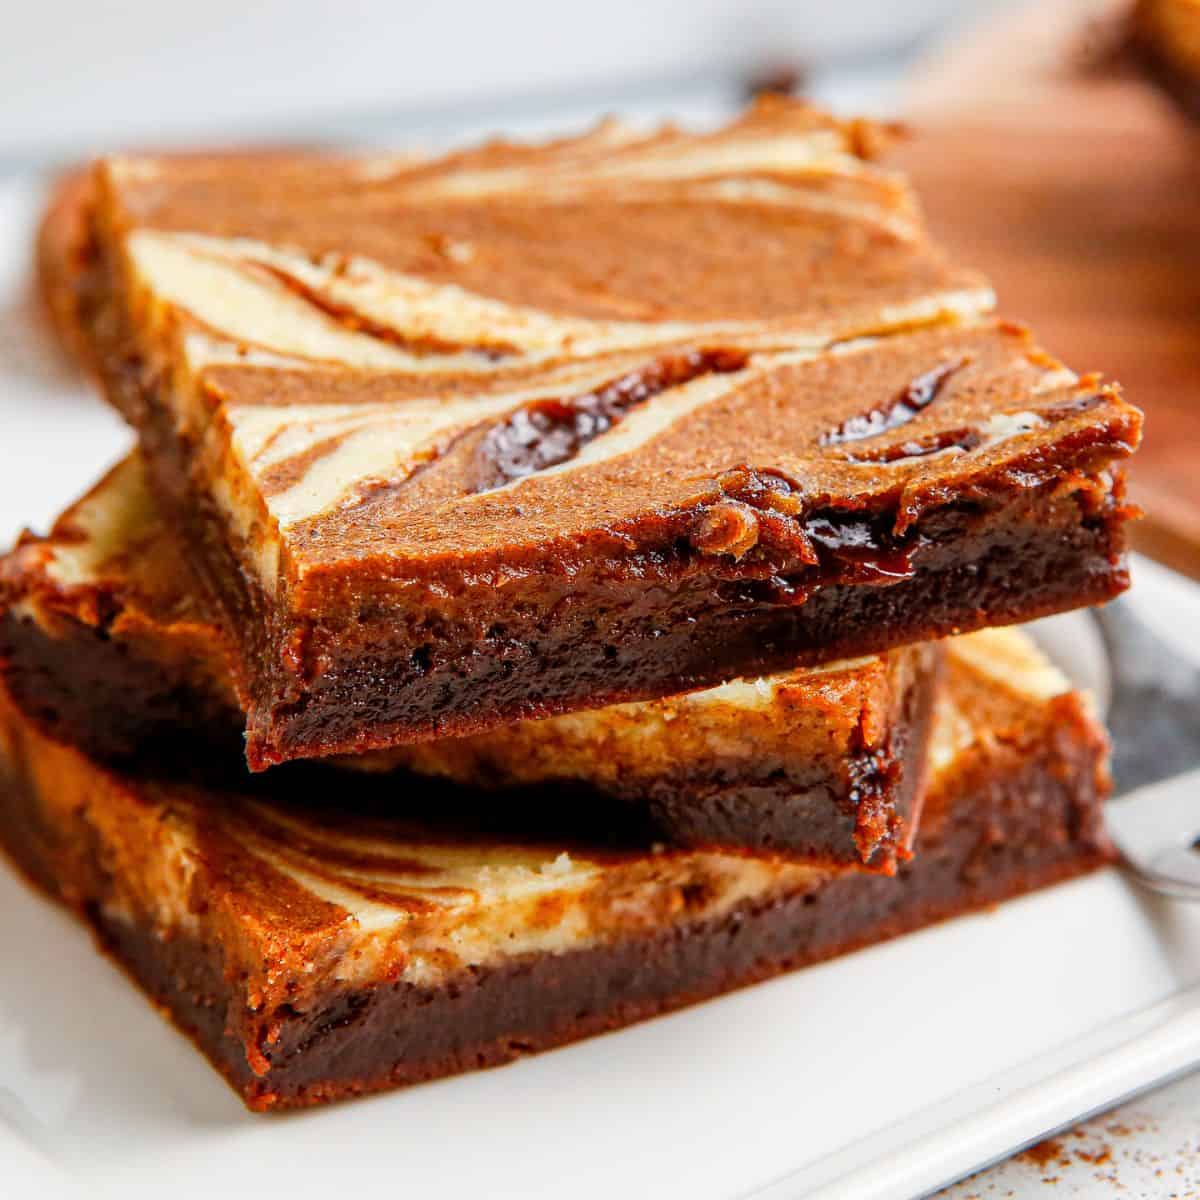 Sugar Free Pumpkin Swirl Brownies, a delicious dessert or snack recipe made with a pumpkin cream cheese swirl topping. Keto Low Carb